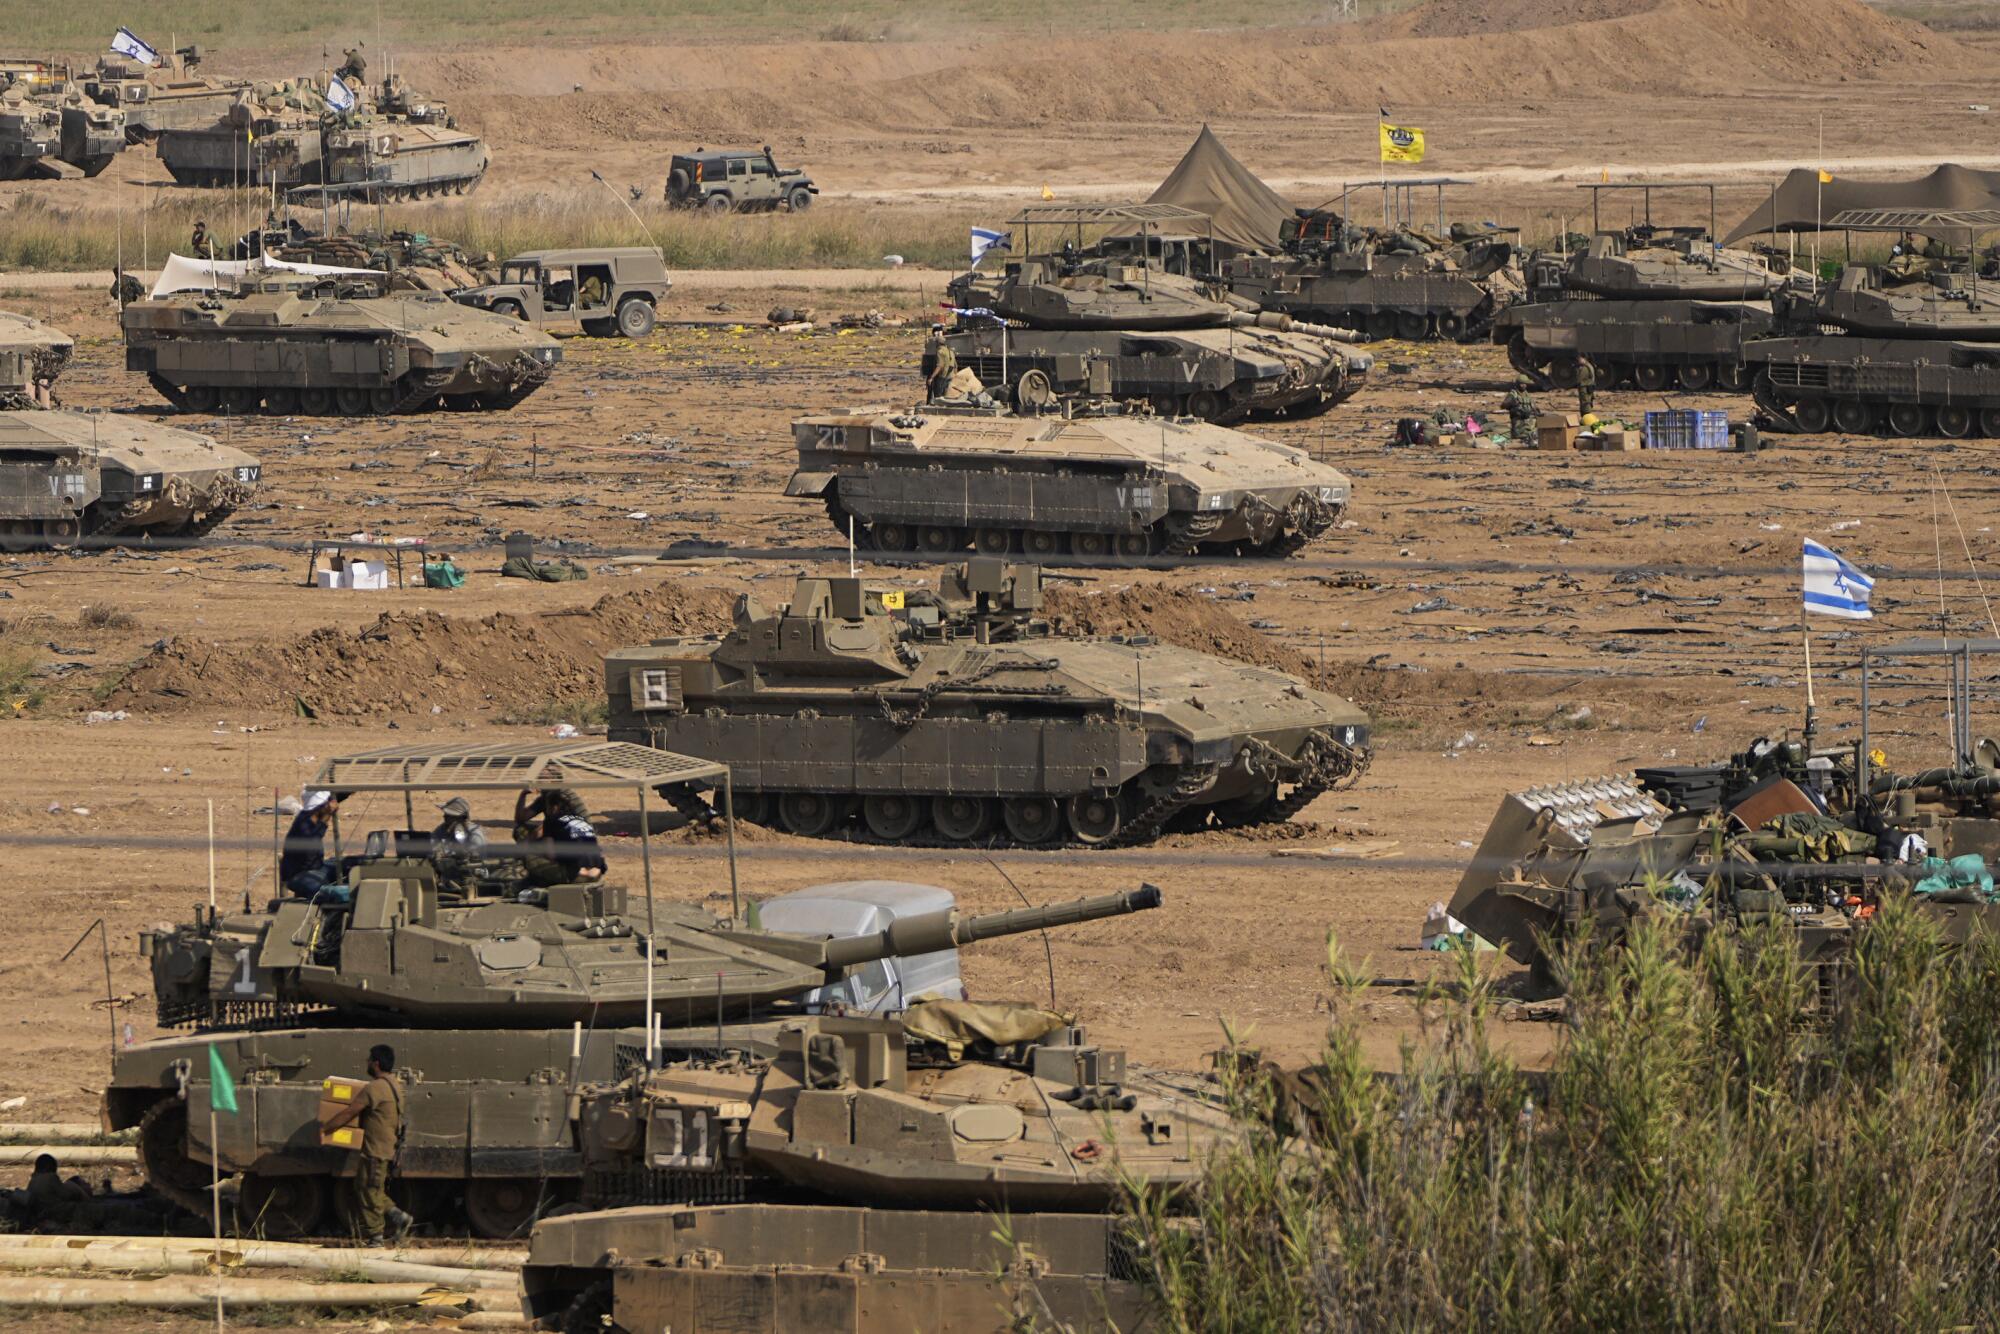 Israeli armored vehicles in a staging area near the border with Gaza